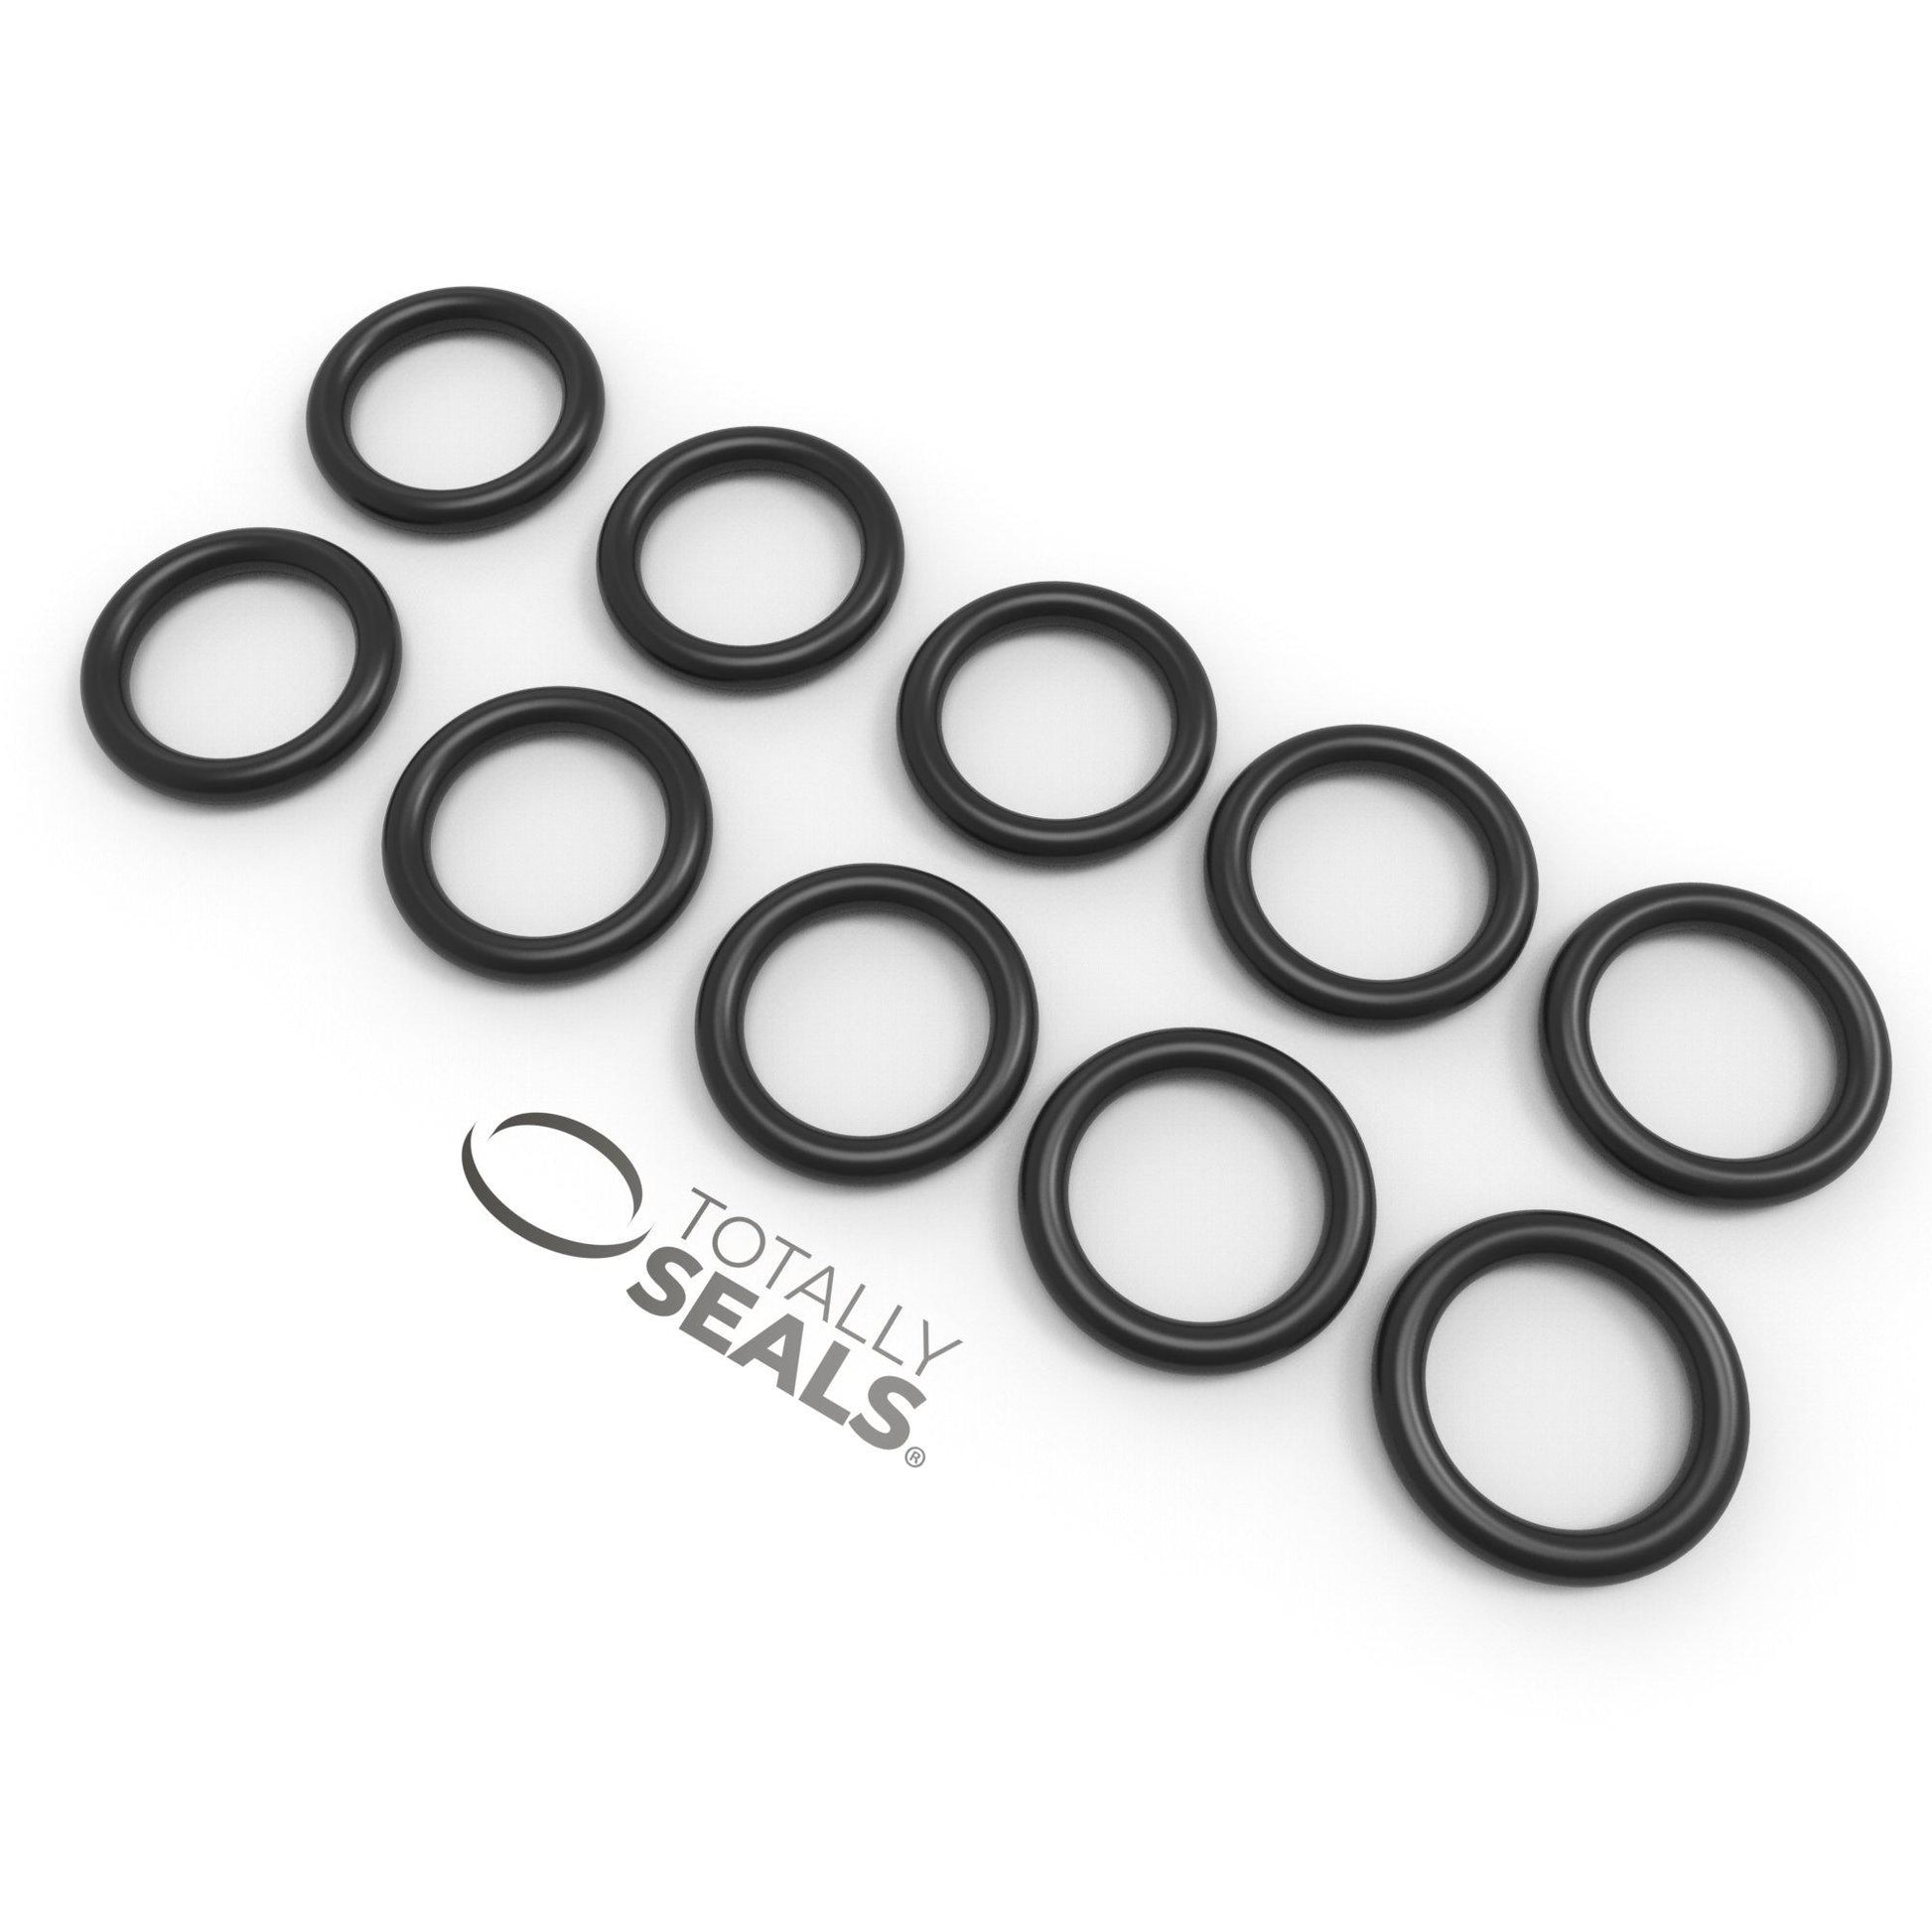 20mm x 1mm (22mm OD) Nitrile O-Rings - Totally Seals®